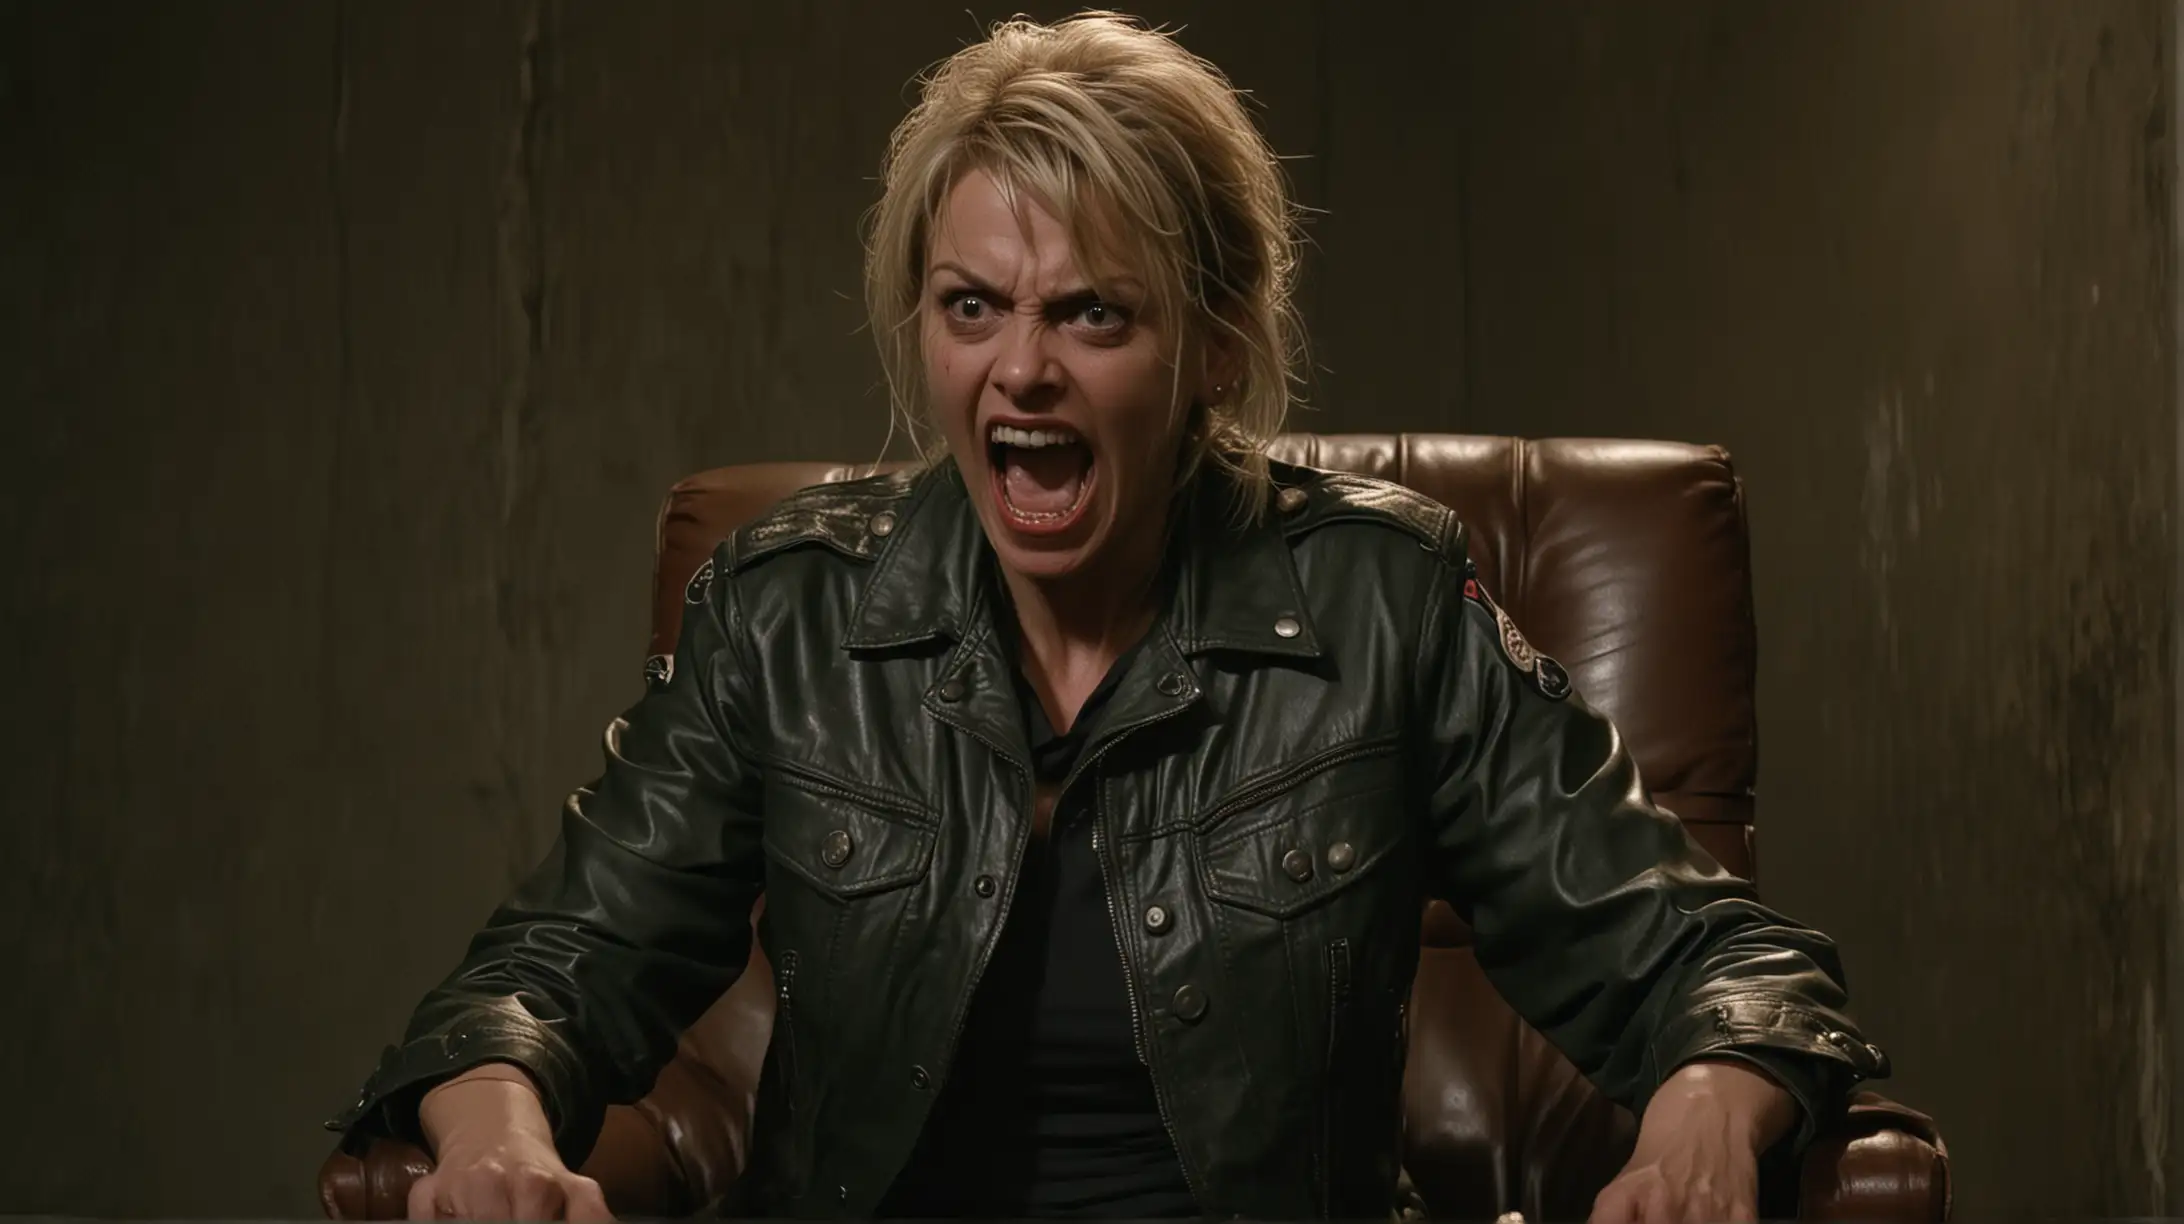 evil high ranking military woman, 55 yo, blonde, scar on face, military jacket, psycho smile, angry, mad, furious, crazy eyes, seated in leather chair, empty dark room, night, 70s crime movie style, super panavision 70